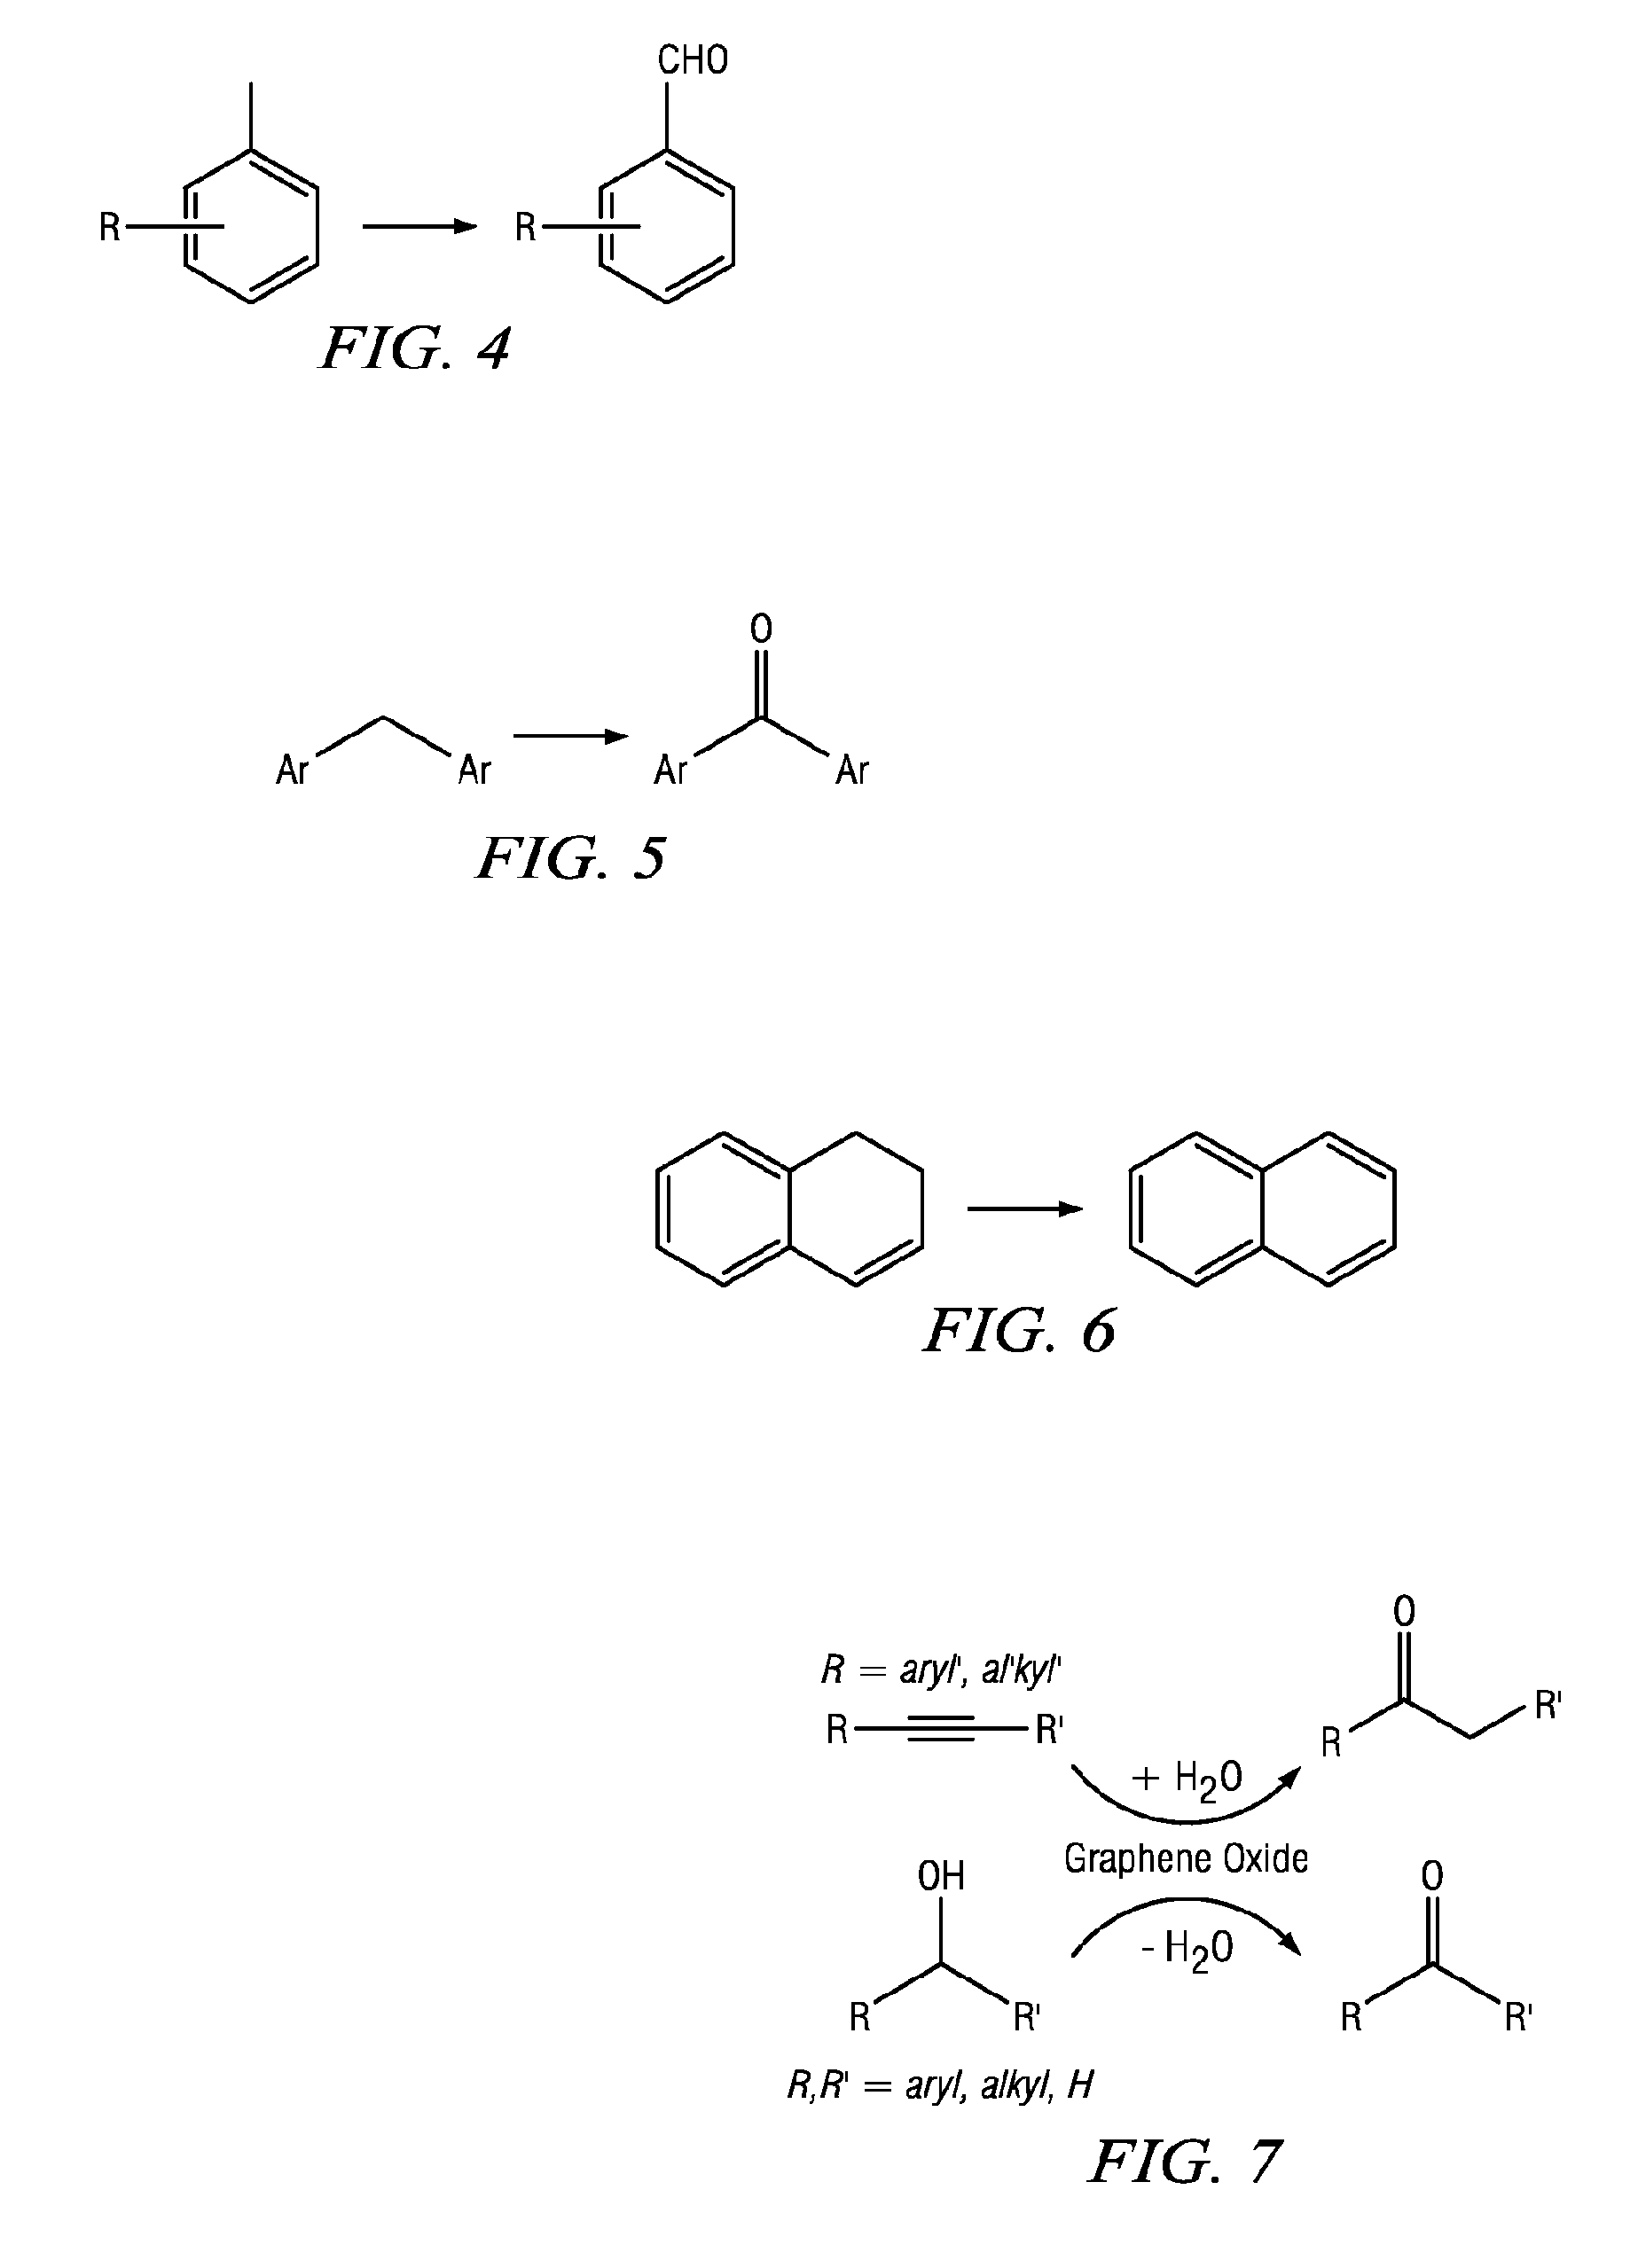 Carbocatalysts for chemical transformations